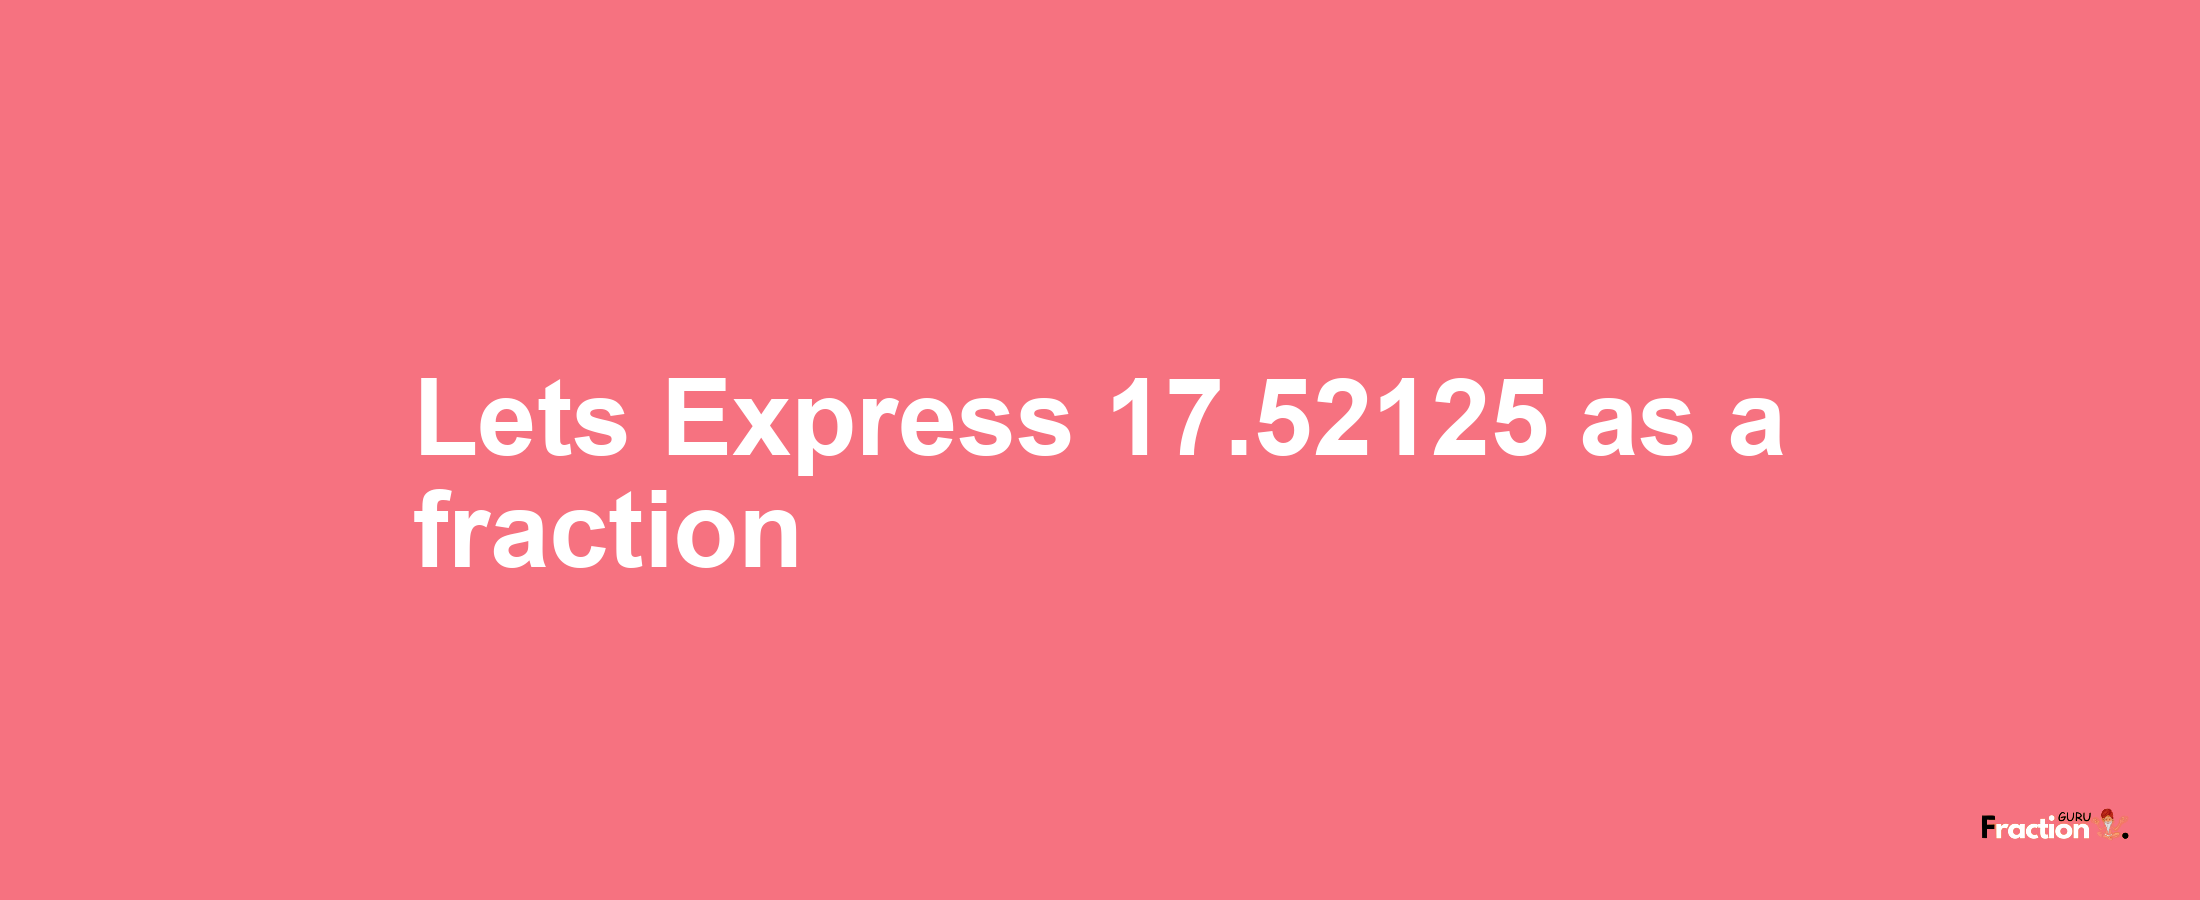 Lets Express 17.52125 as afraction